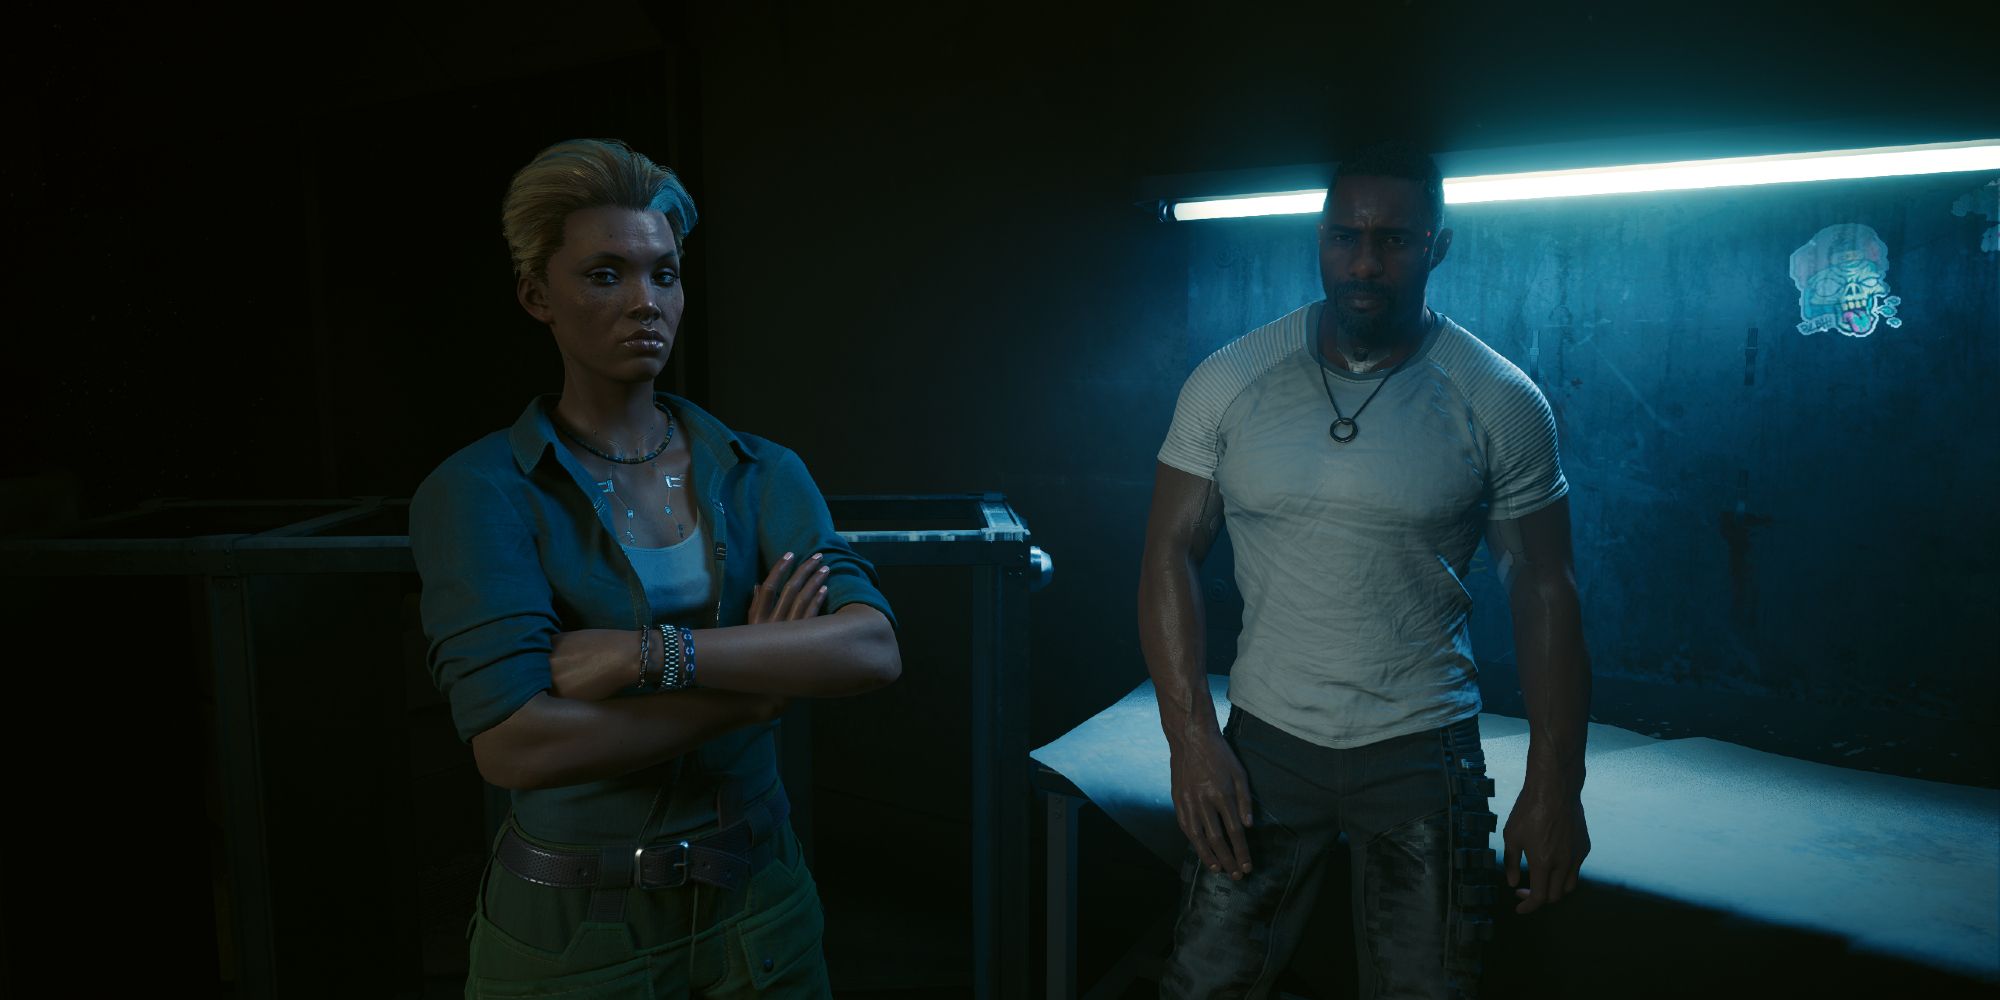 Alex and Reed looking at V in Cyberpunk 2077.